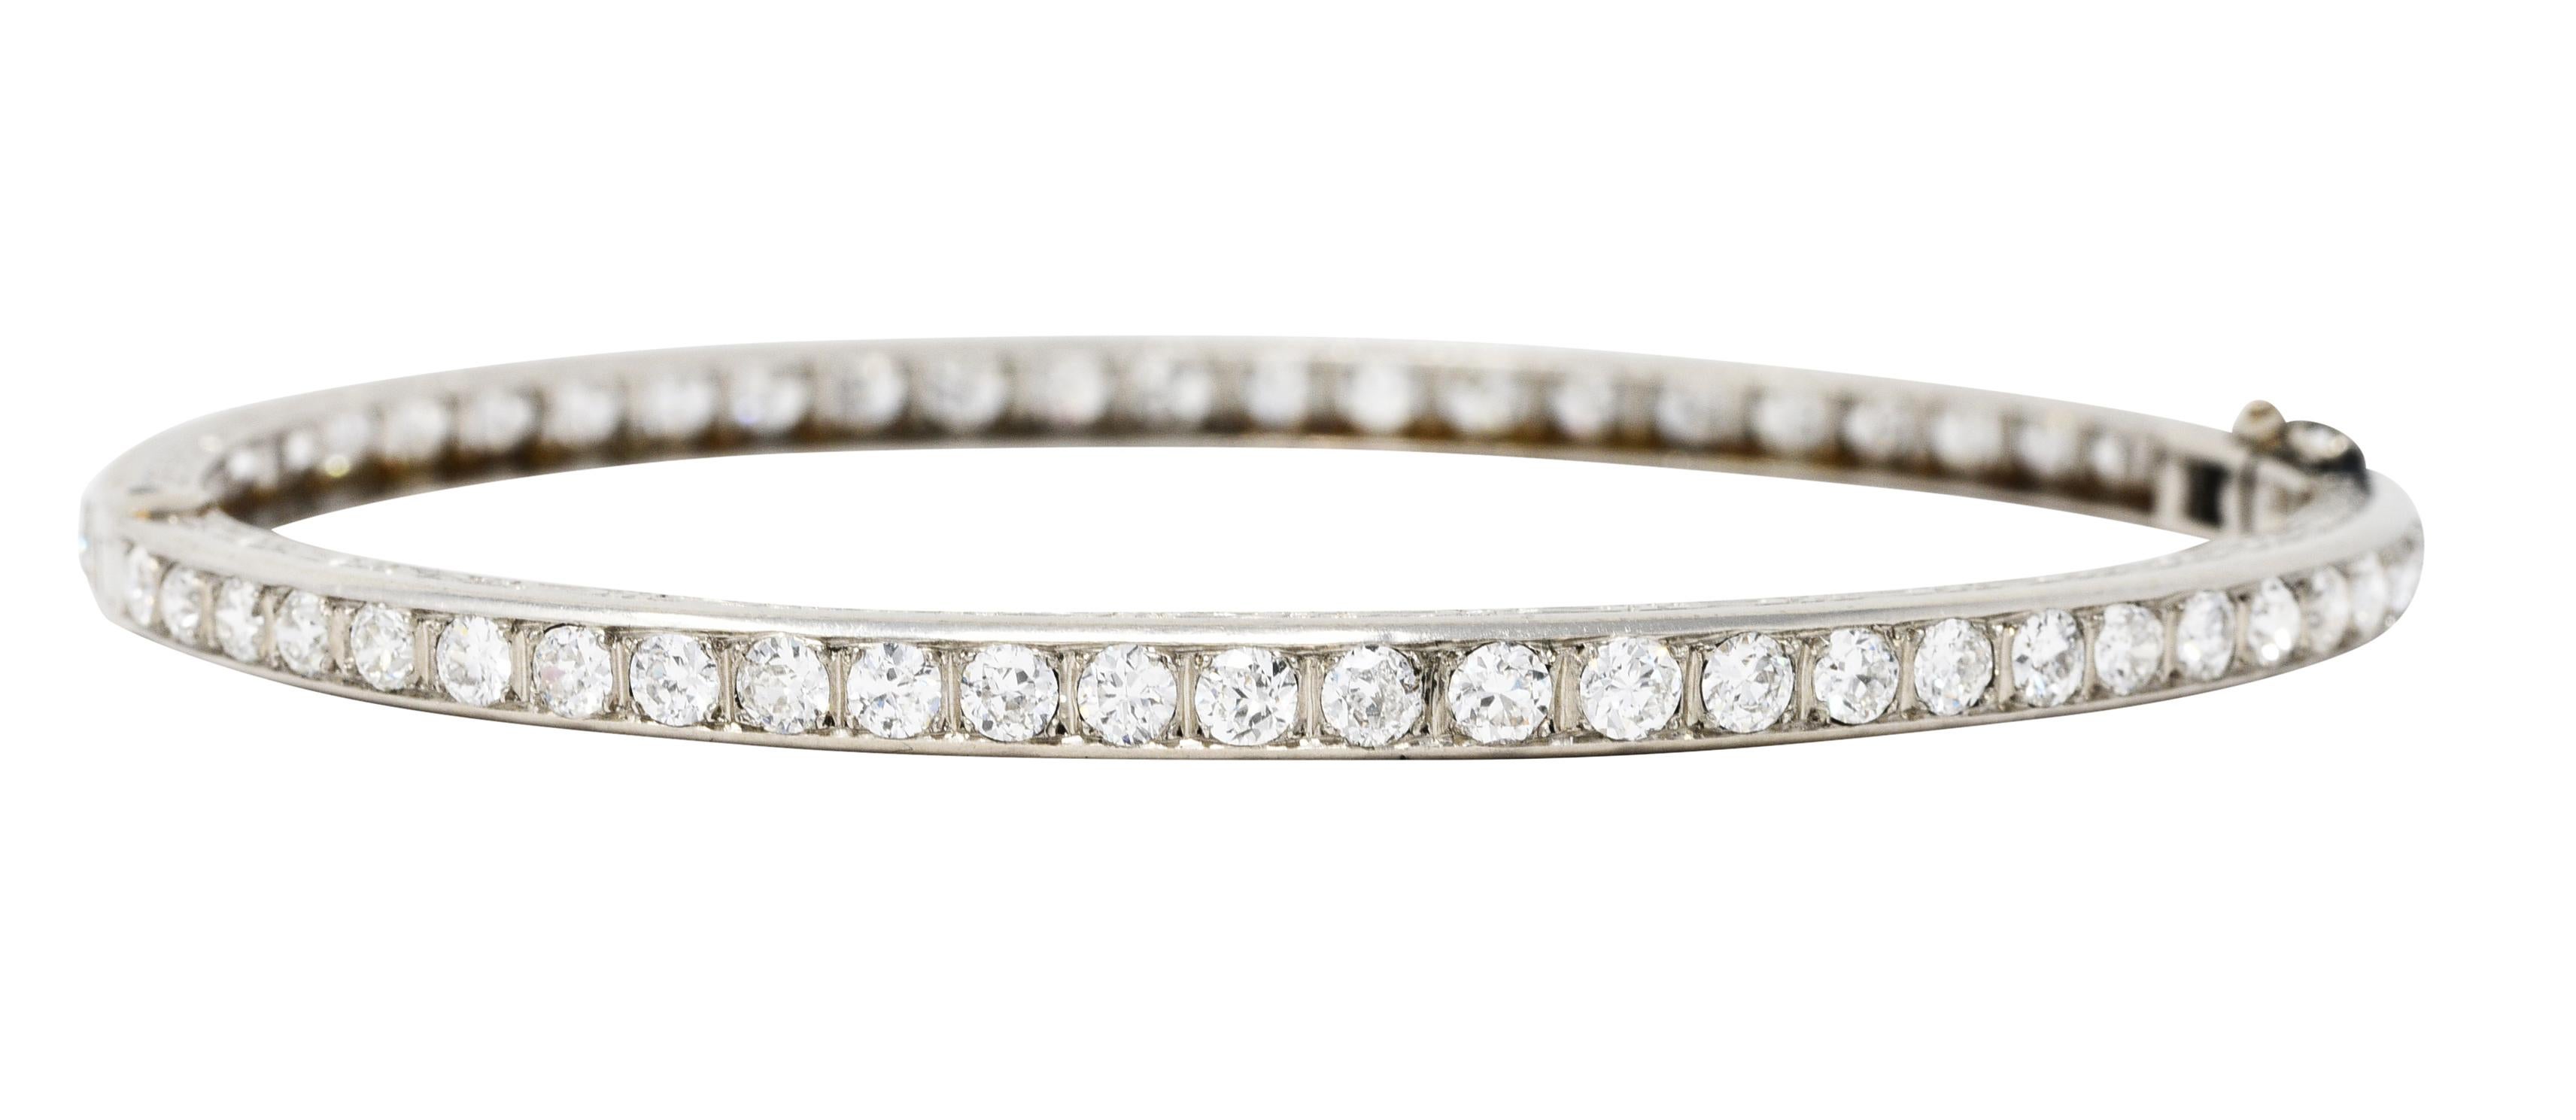 Hinged bangle bracelet features transitional and old European cut diamonds fully around

Set in recessed square forms while weighing in total approximately 5.80 carats

With near colorless G to H color and VS to SI in clarity

Profile engraved fully